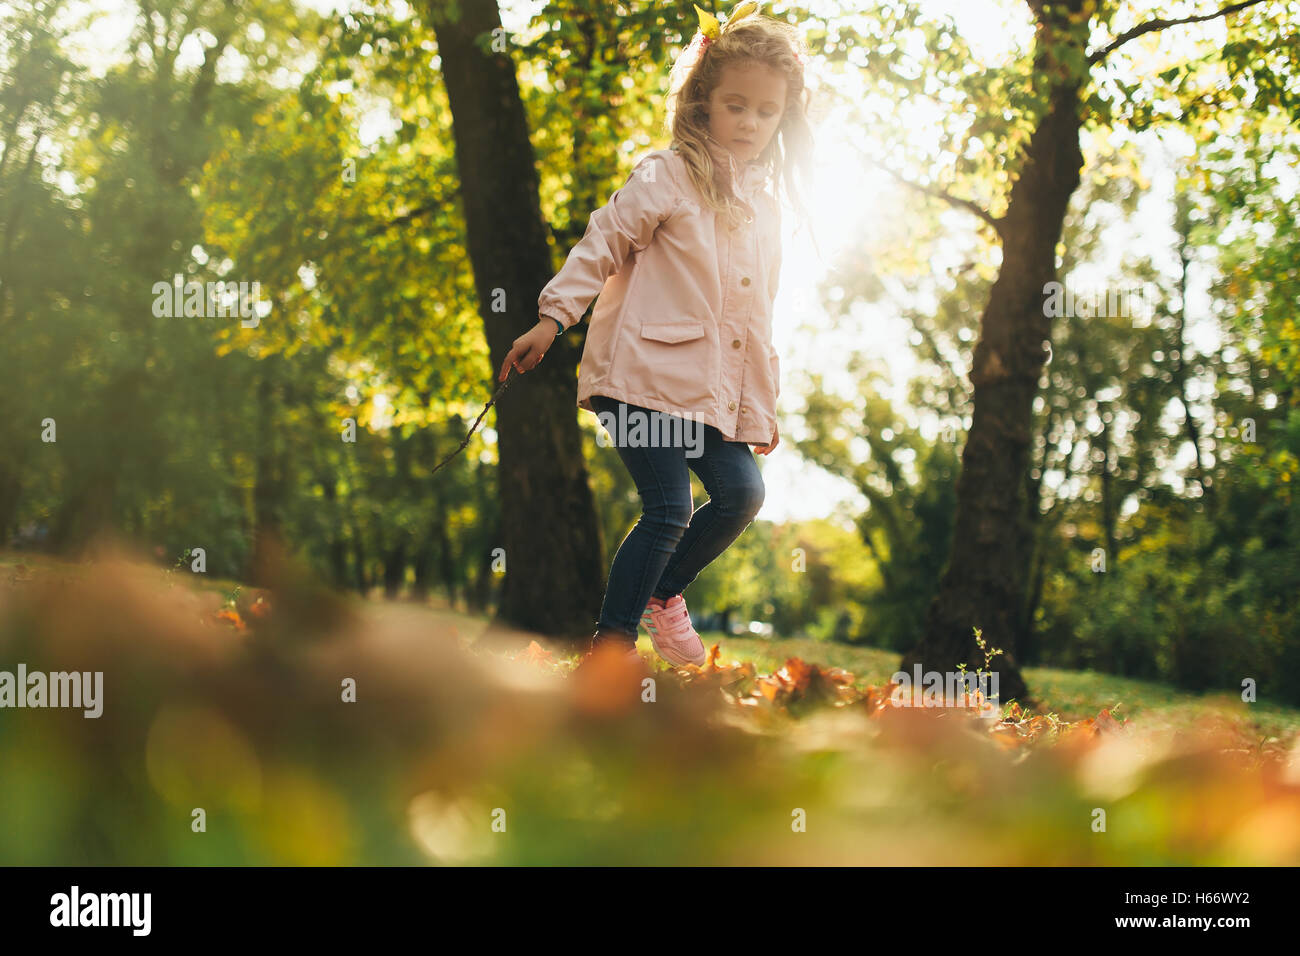 Happy child girl in autumn park Banque D'Images